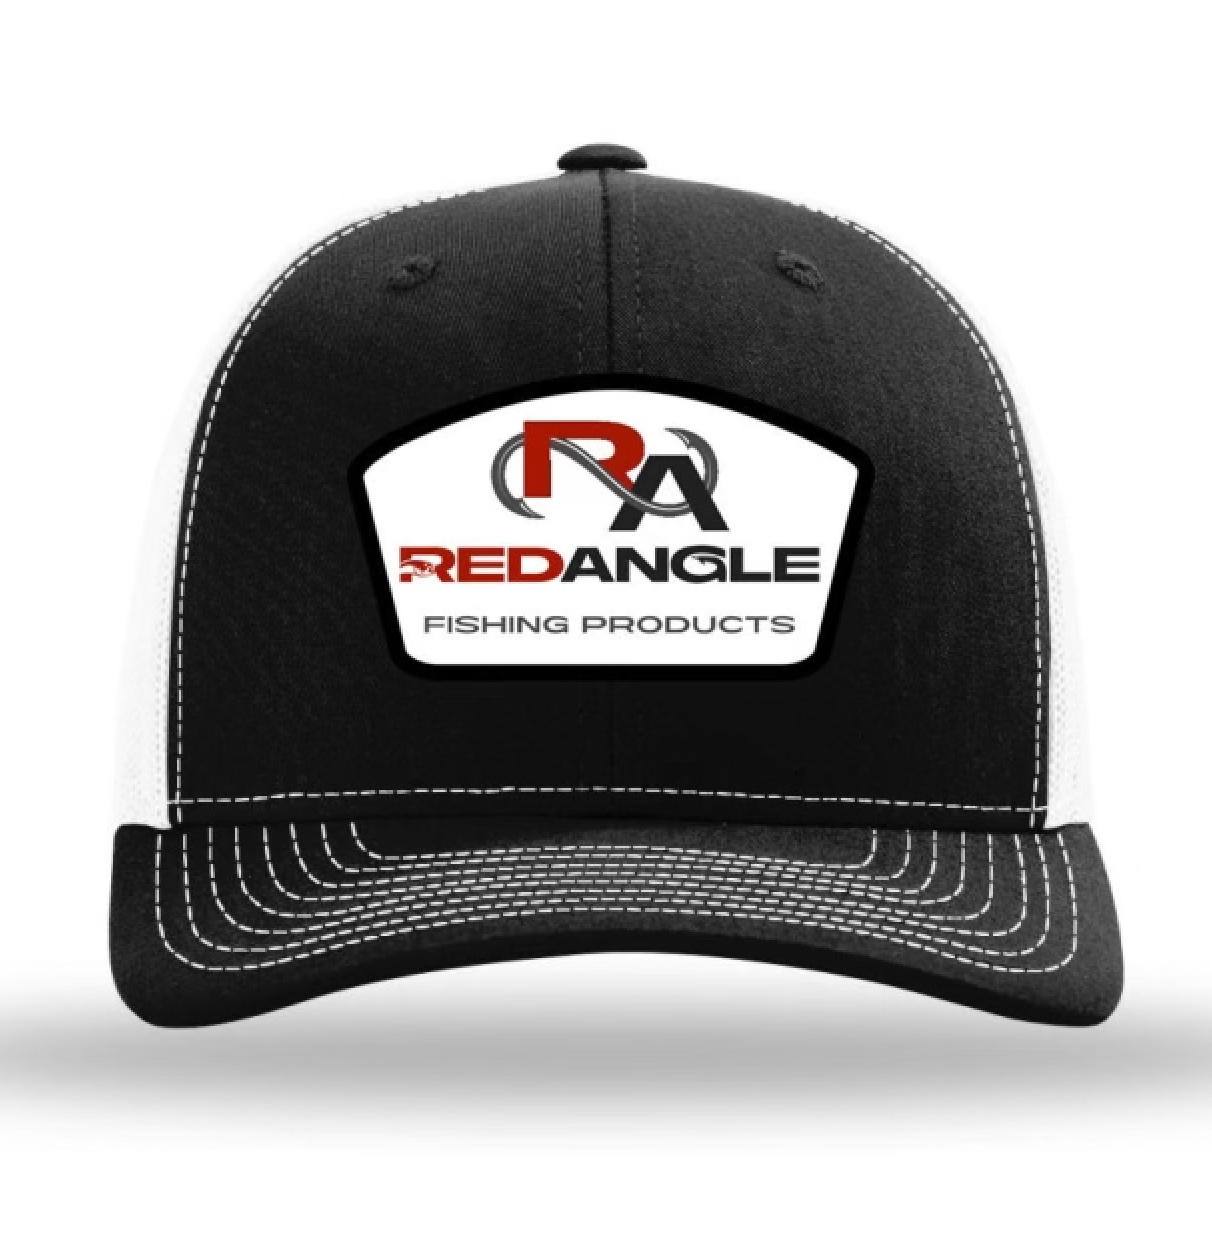 Fishing Hats - Red Angle Fishing Products